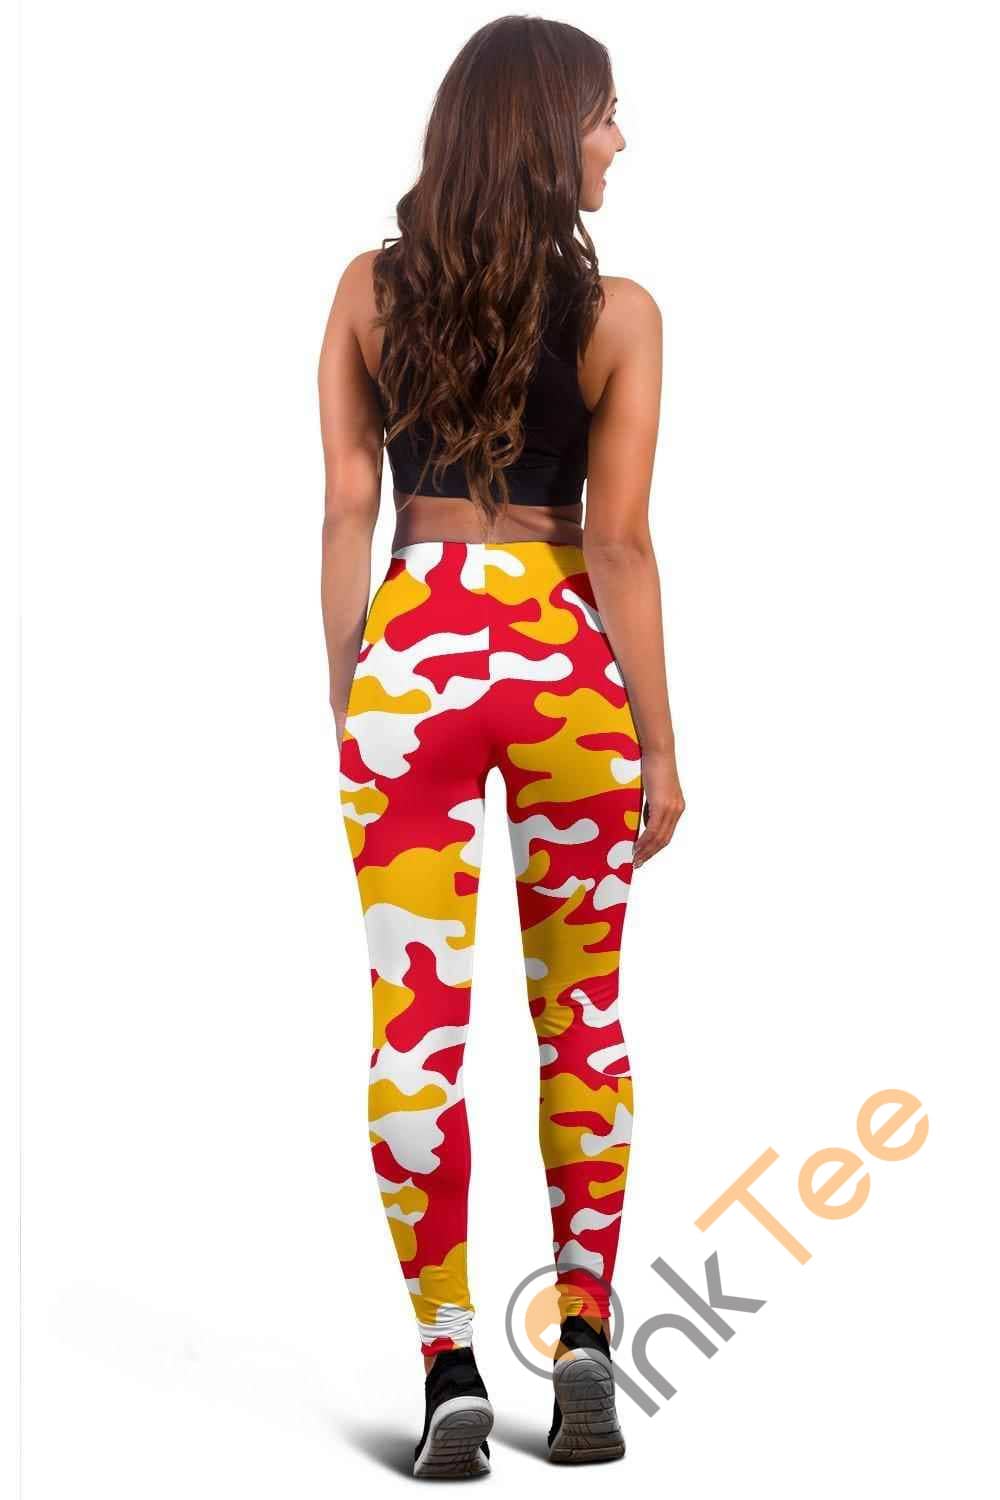 Inktee Store - Kansas City Chiefs Inspired Tru Camo 3D All Over Print For Yoga Fitness Fashion Women'S Leggings Image